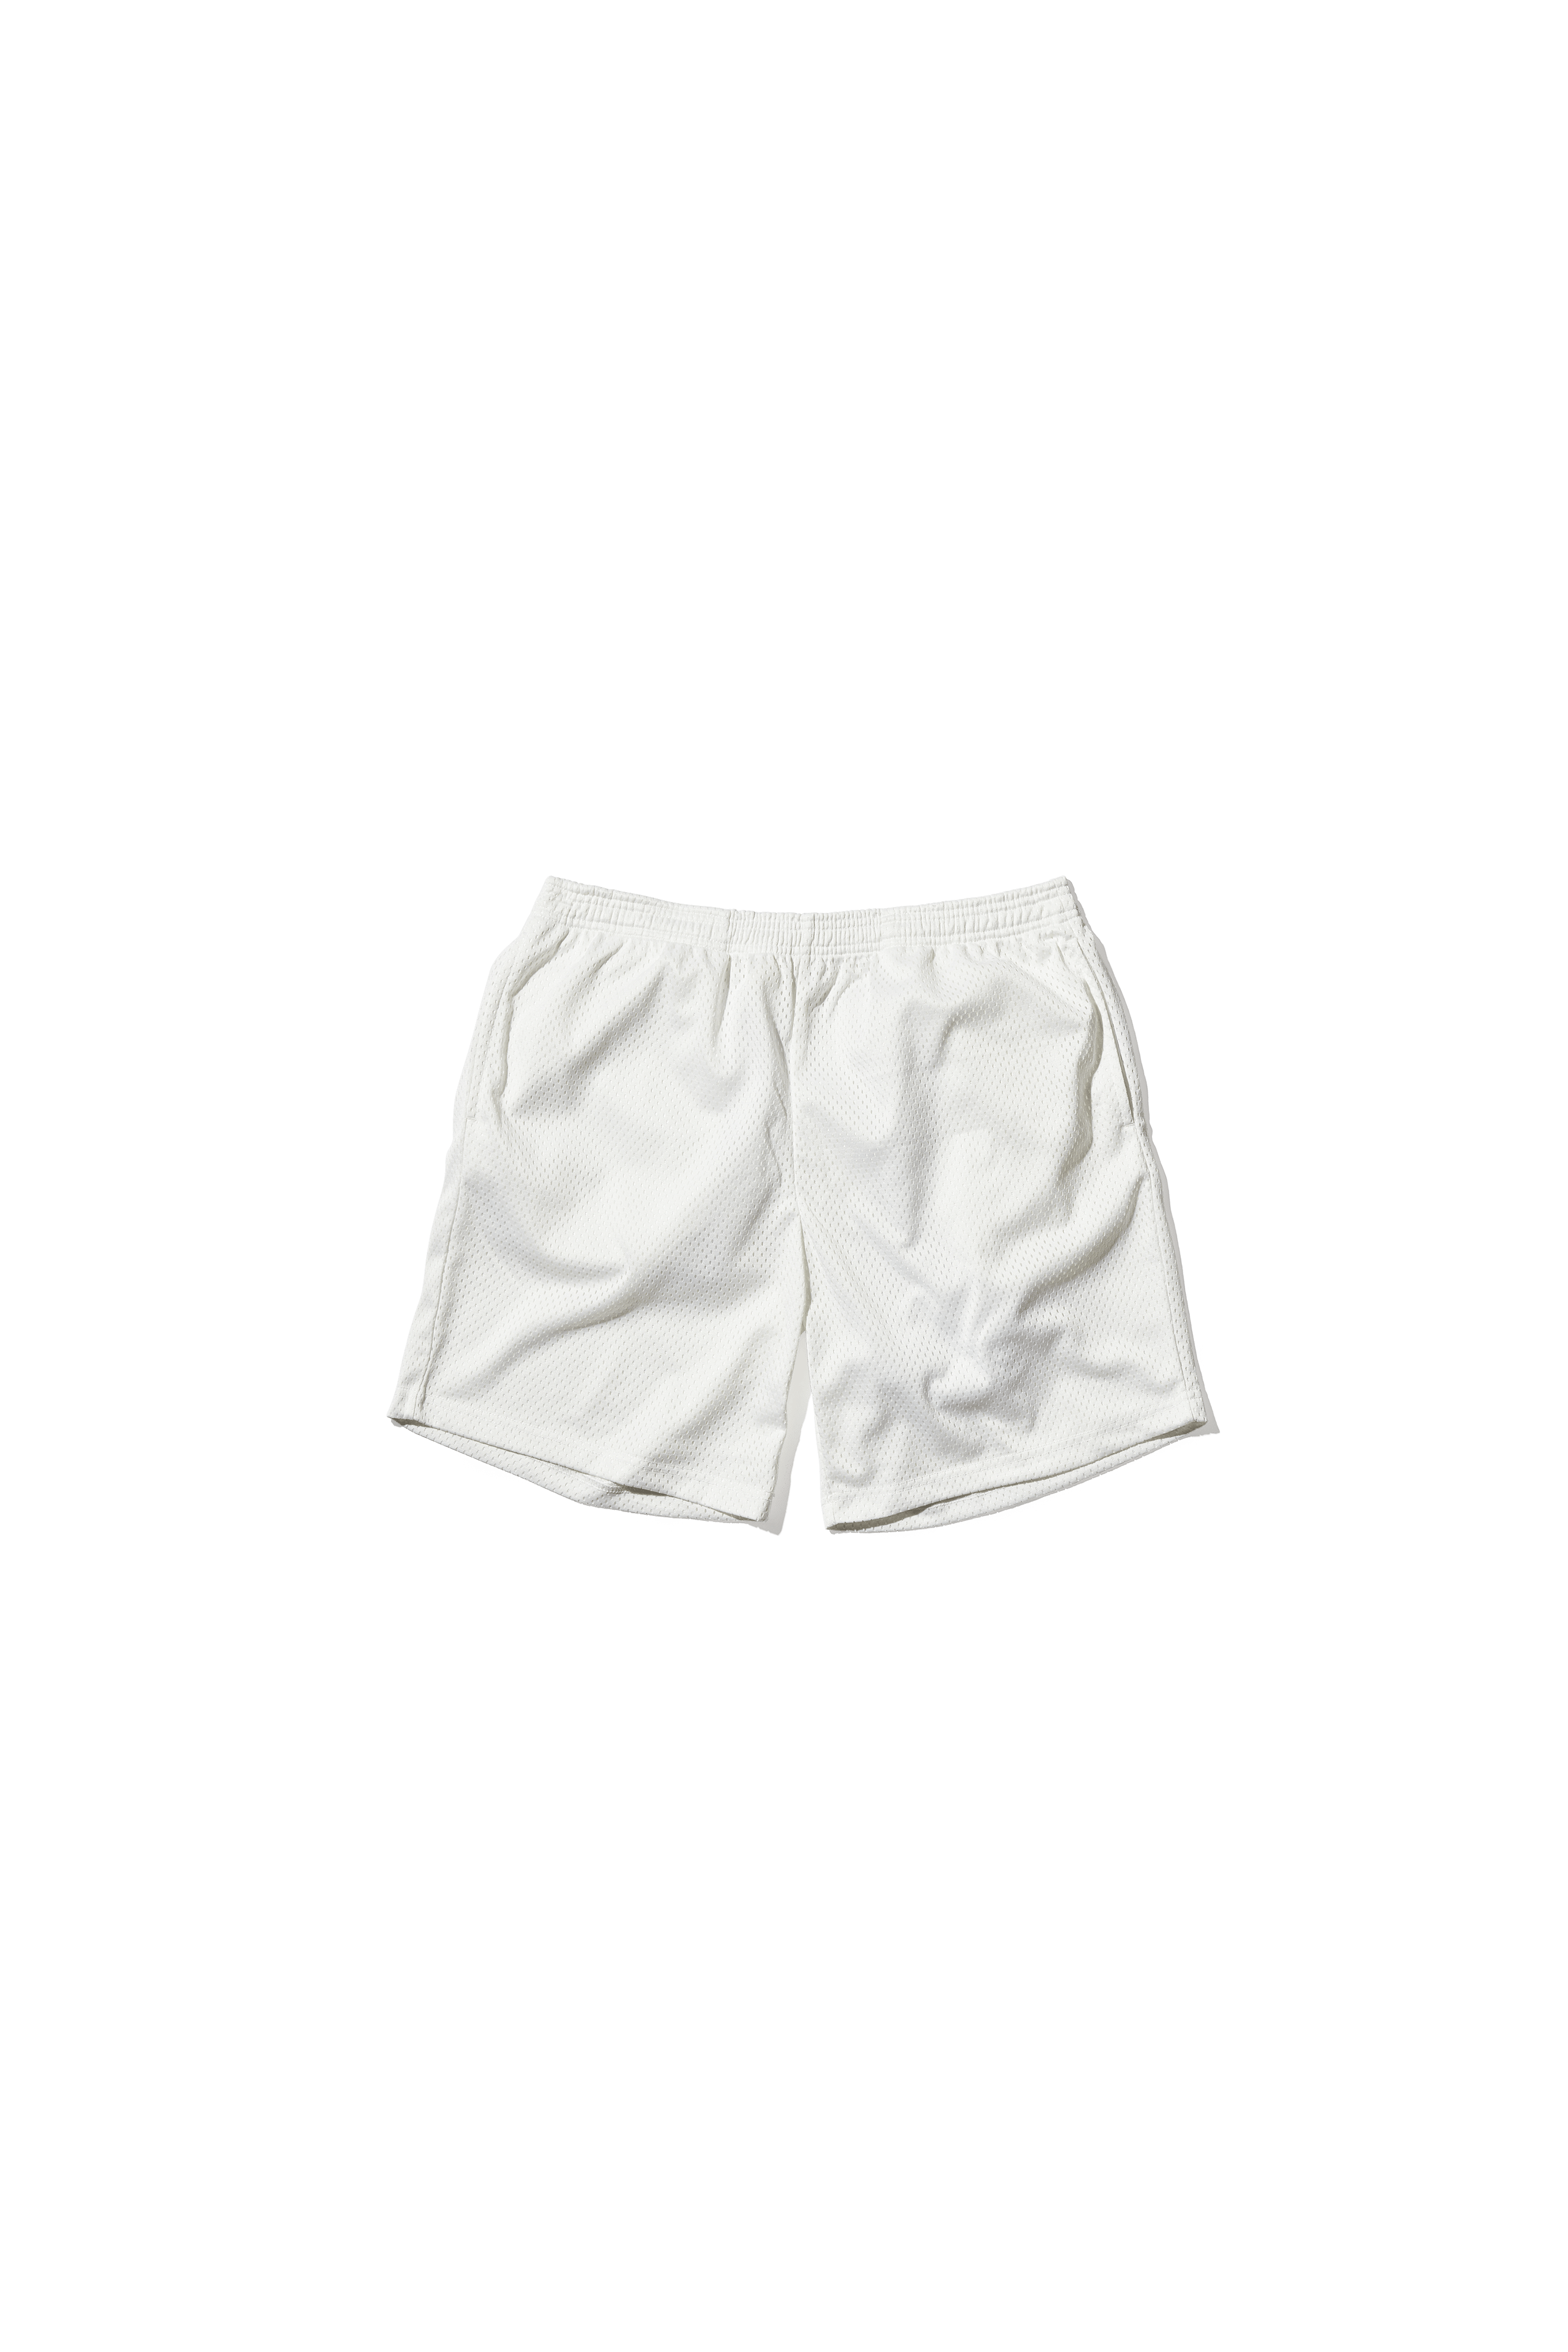 Ready To Dye Mesh Practice Shorts – MADE